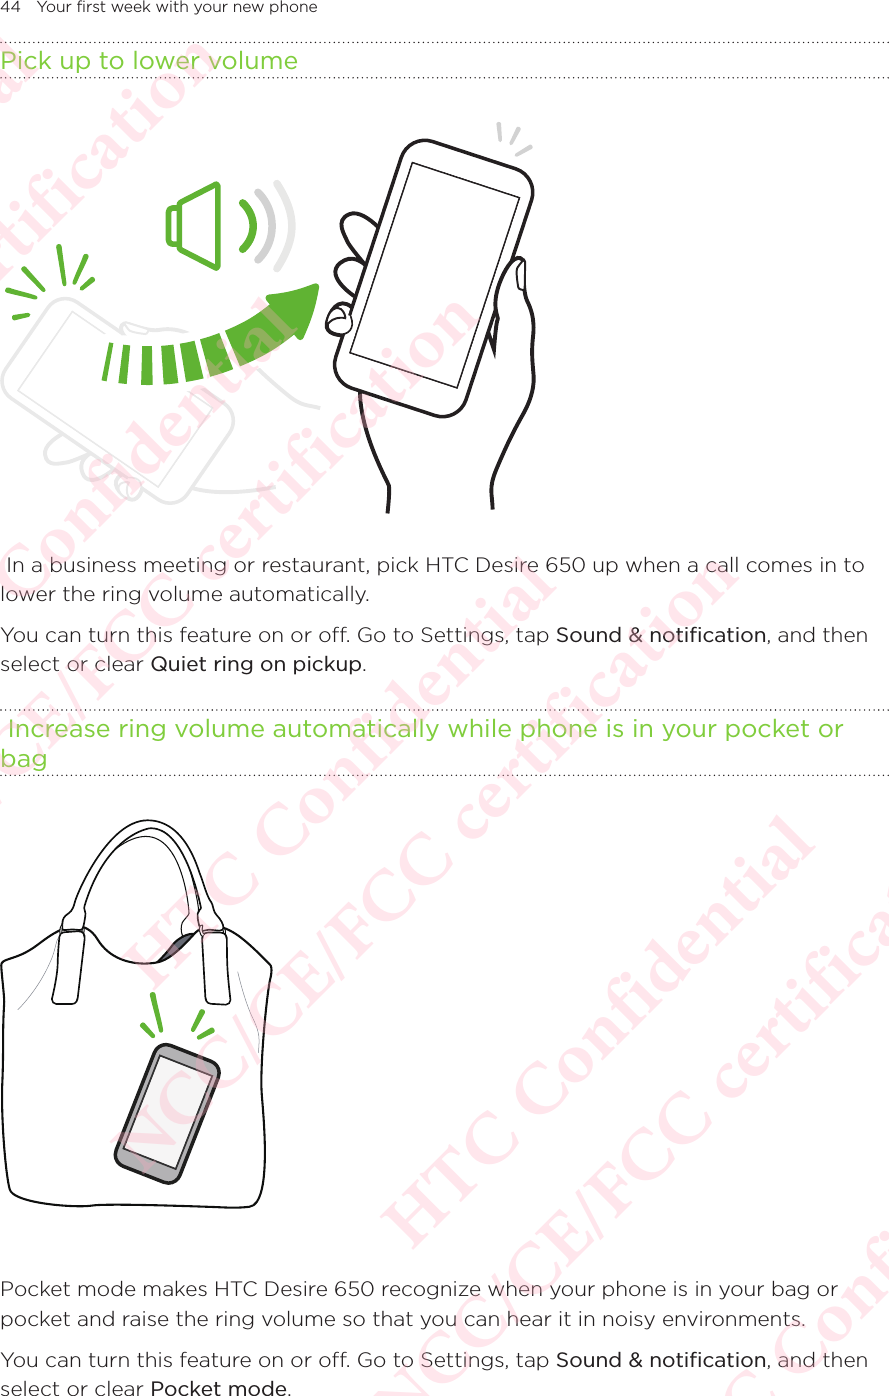 44 Your first week with your new phonePick up to lower volume  In a business meeting or restaurant, pick HTC Desire 650 up when a call comes in to lower the ring volume automatically. You can turn this feature on or off. Go to Settings, tap Sound &amp; notification, and then select or clear Quiet ring on pickup.  Increase ring volume automatically while phone is in your pocket or bag Pocket mode makes HTC Desire 650 recognize when your phone is in your bag or pocket and raise the ring volume so that you can hear it in noisy environments. You can turn this feature on or off. Go to Settings, tap Sound &amp; notification, and then select or clear Pocket mode. HTC Confidential NCC/CE/FCC certification  HTC Confidential NCC/CE/FCC certification  HTC Confidential NCC/CE/FCC certification  HTC Confidential NCC/CE/FCC certification  HTC Confidential NCC/CE/FCC certification